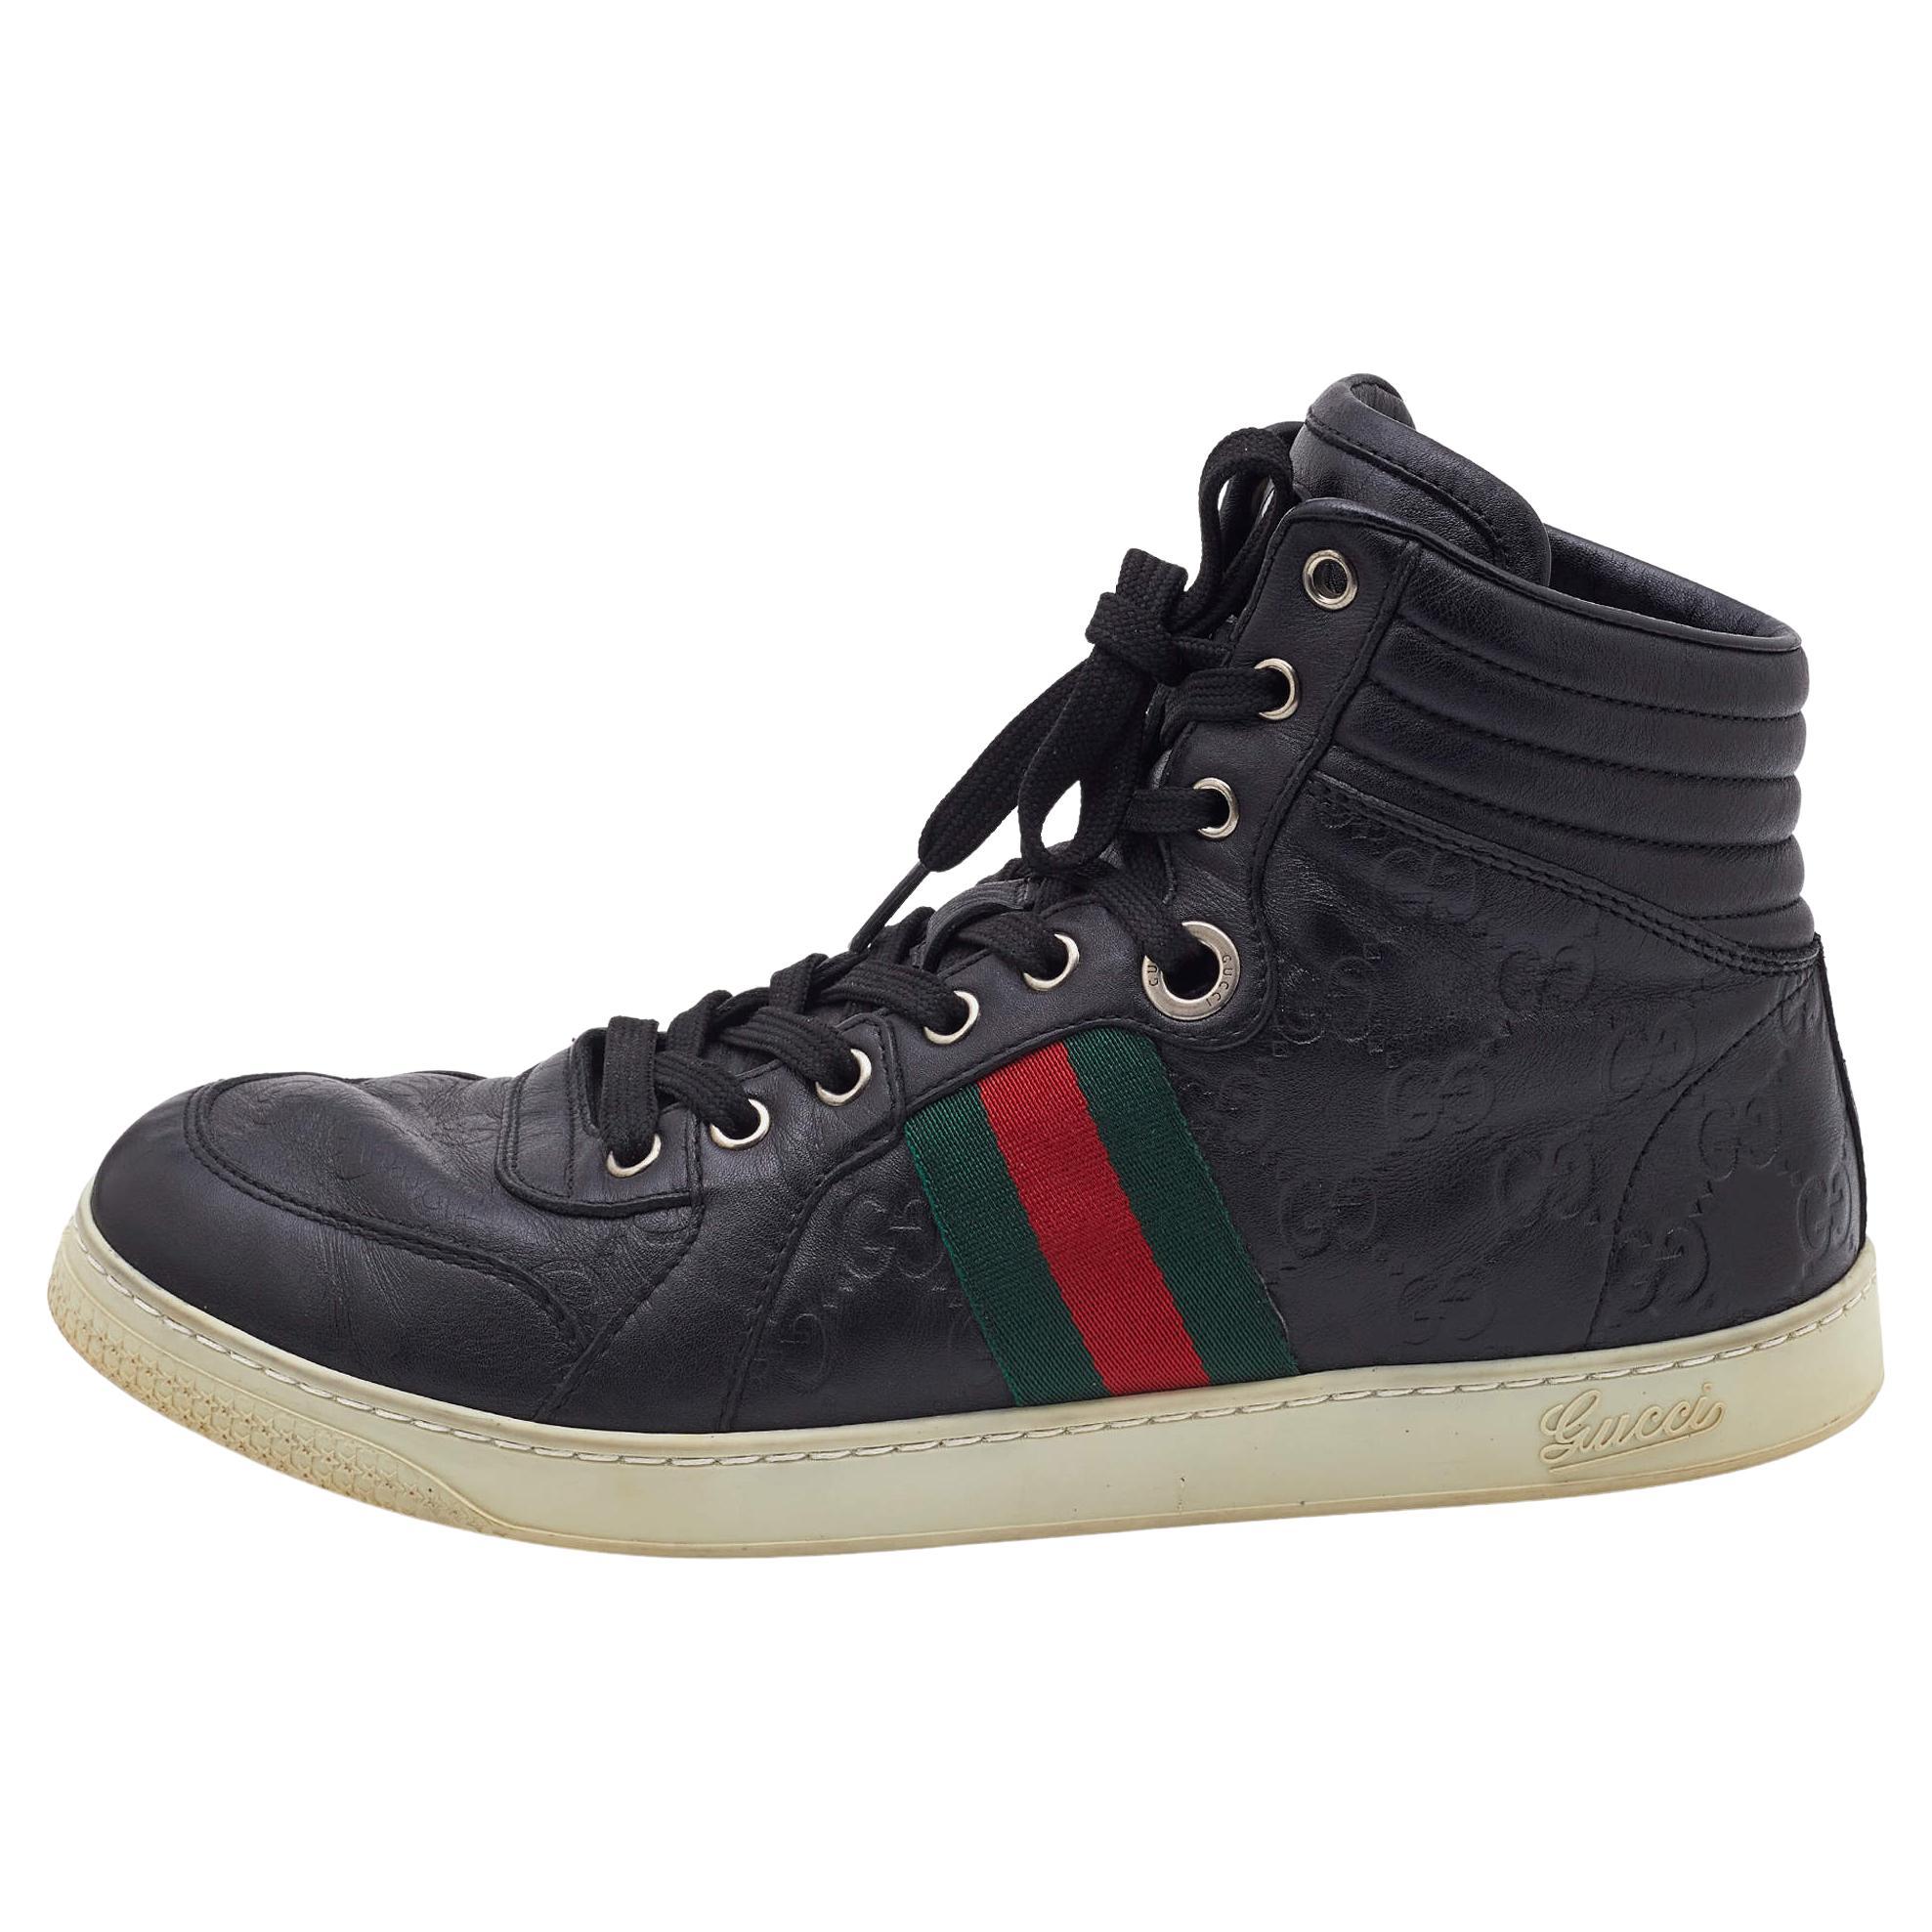 Gucci Black Guccissima Leather Web Detail High Top Sneakers Size 41.5 For Sale